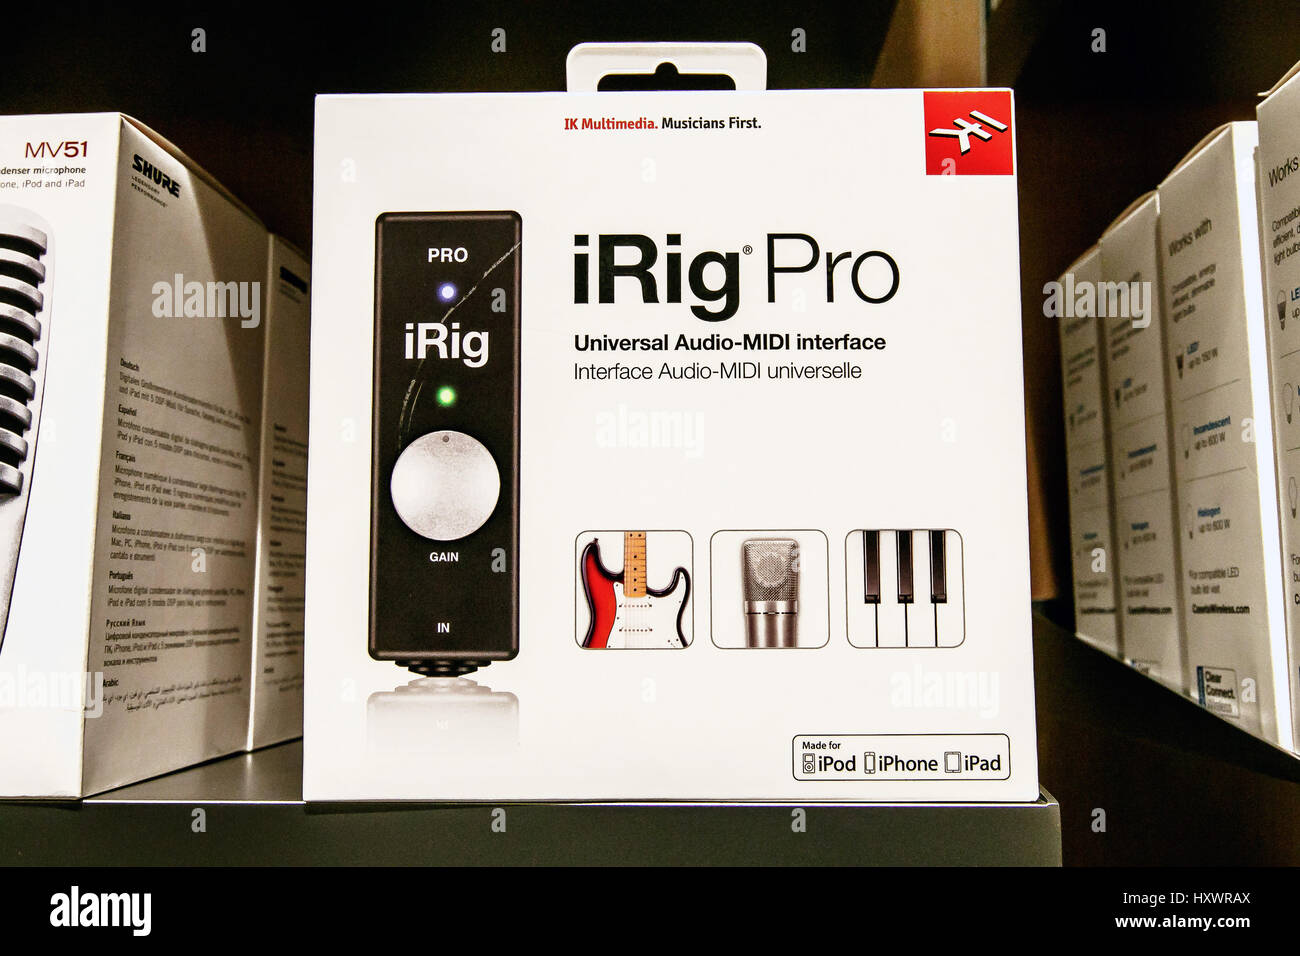 iRig Pro, a universal Audio-MIDI interface device is offered for sale in an Apple store. Stock Photo